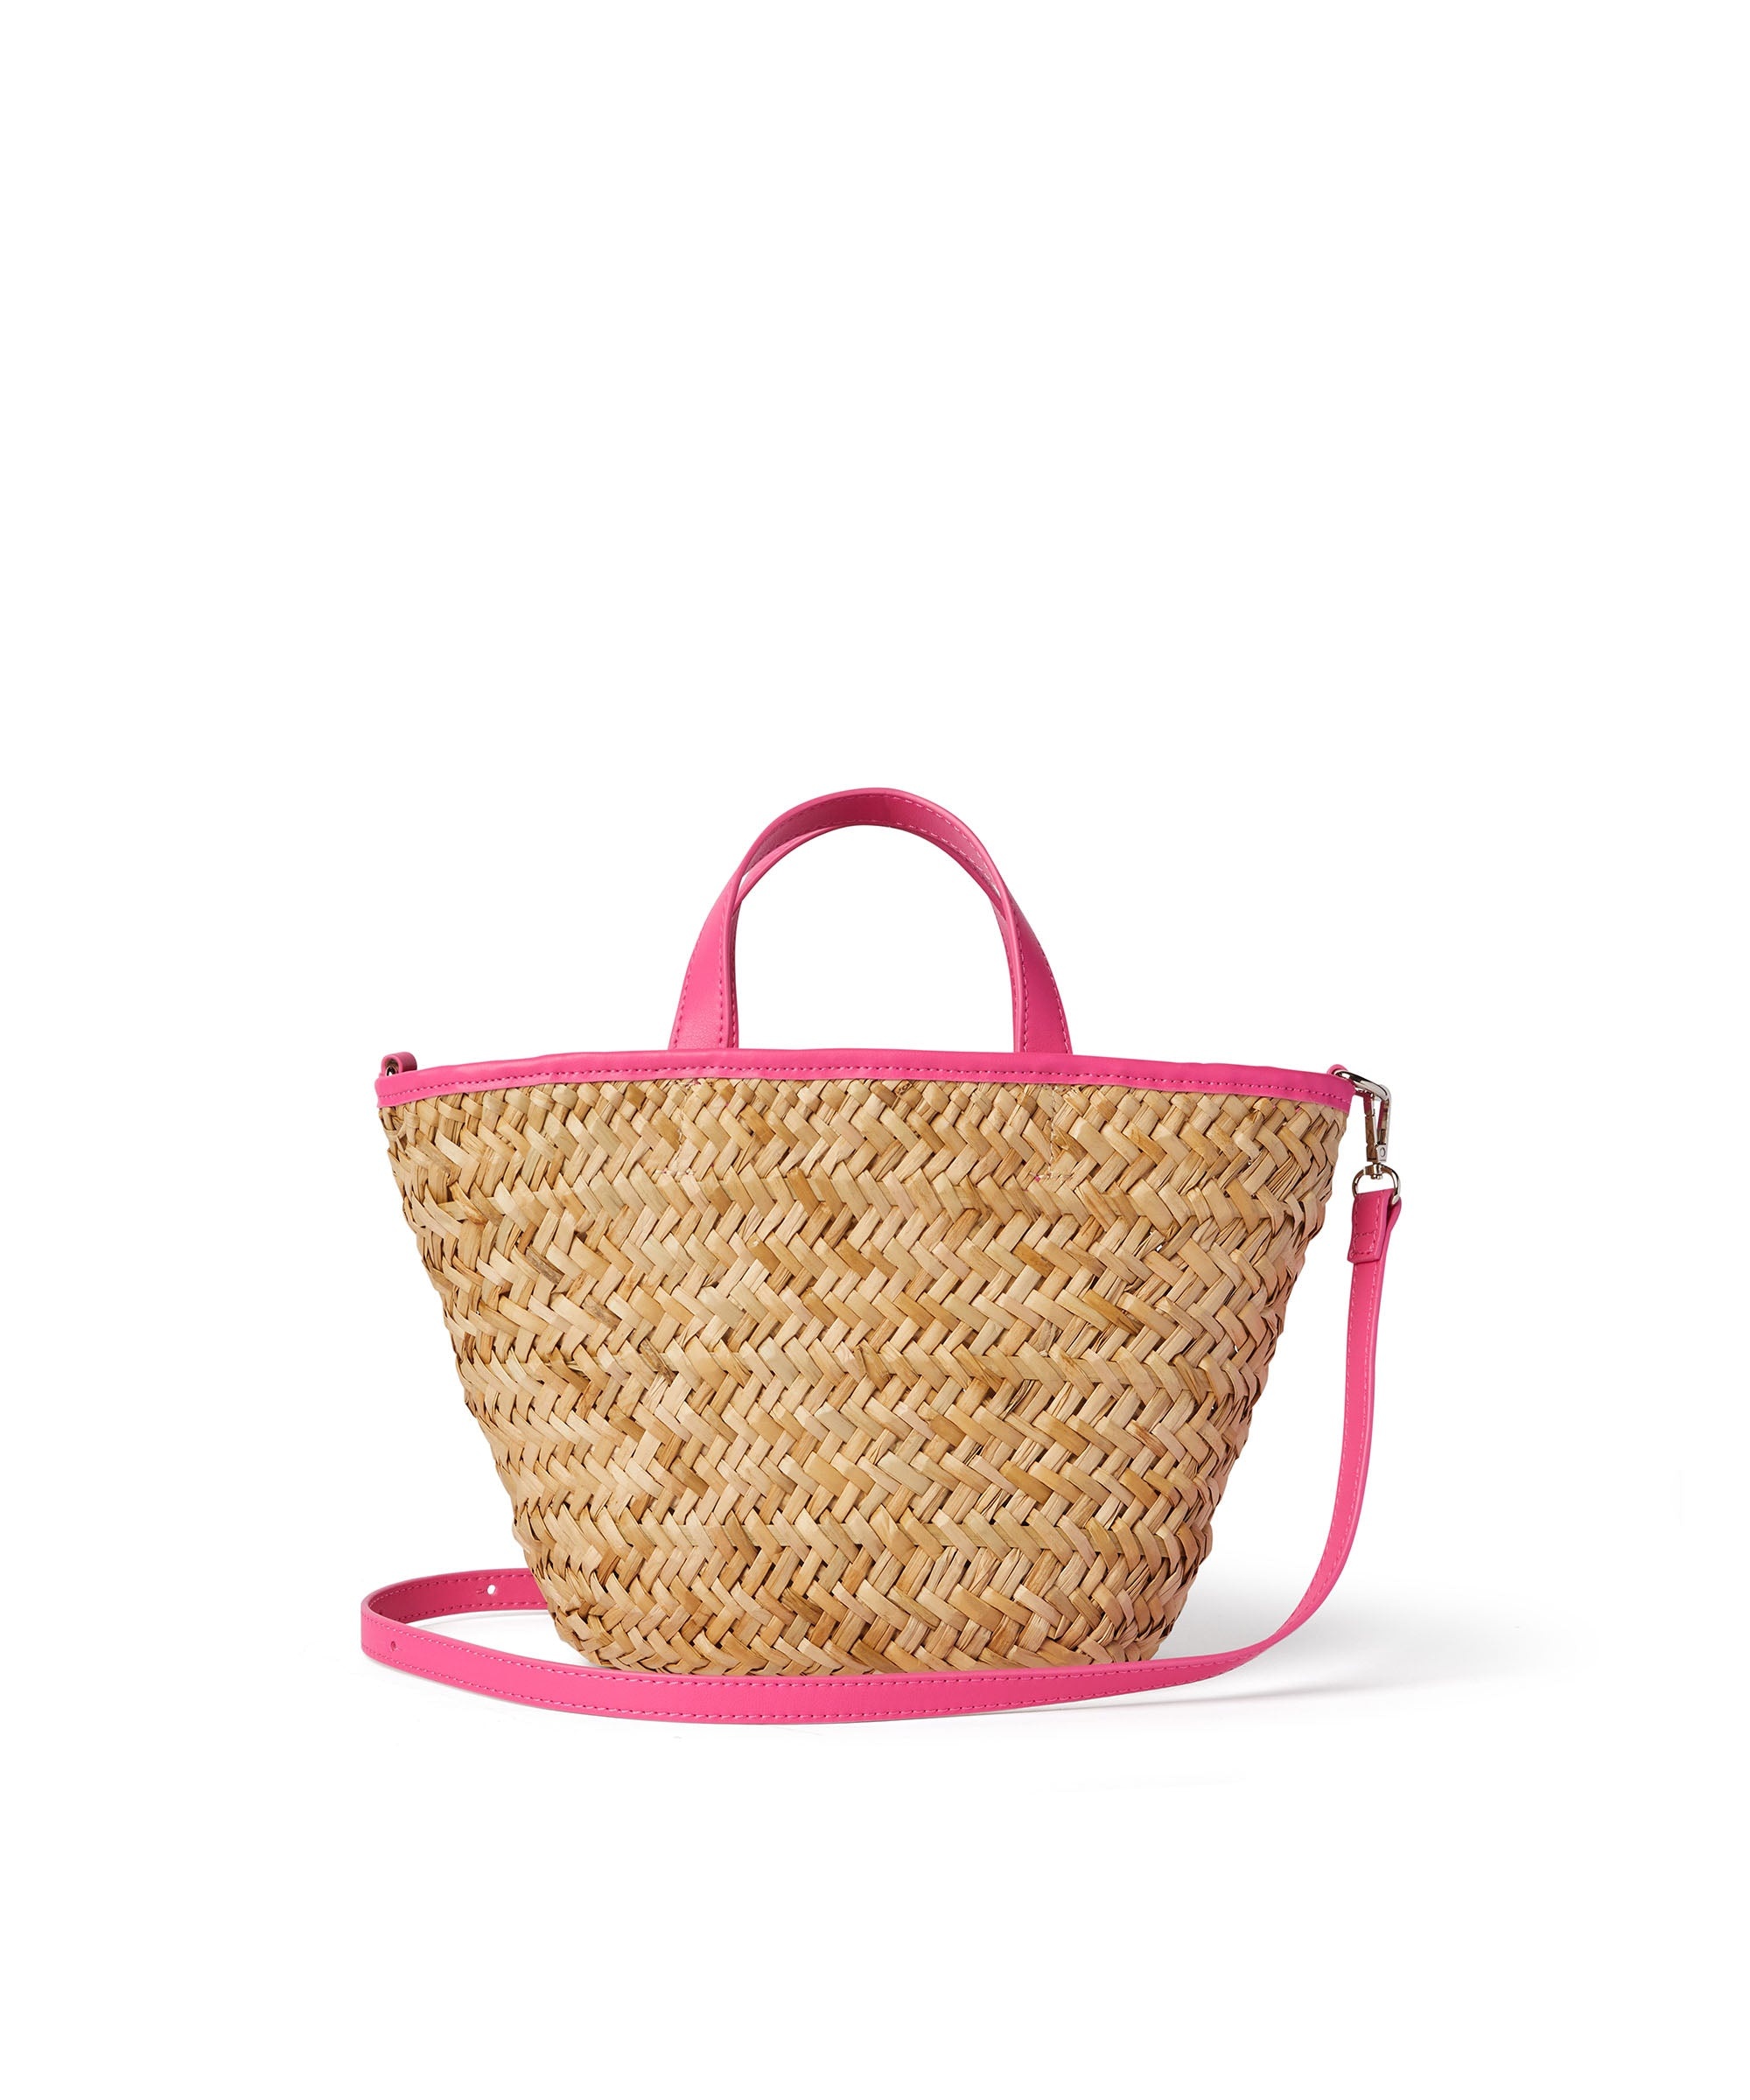 Large straw tote bag with accomanying mini pouch - 2